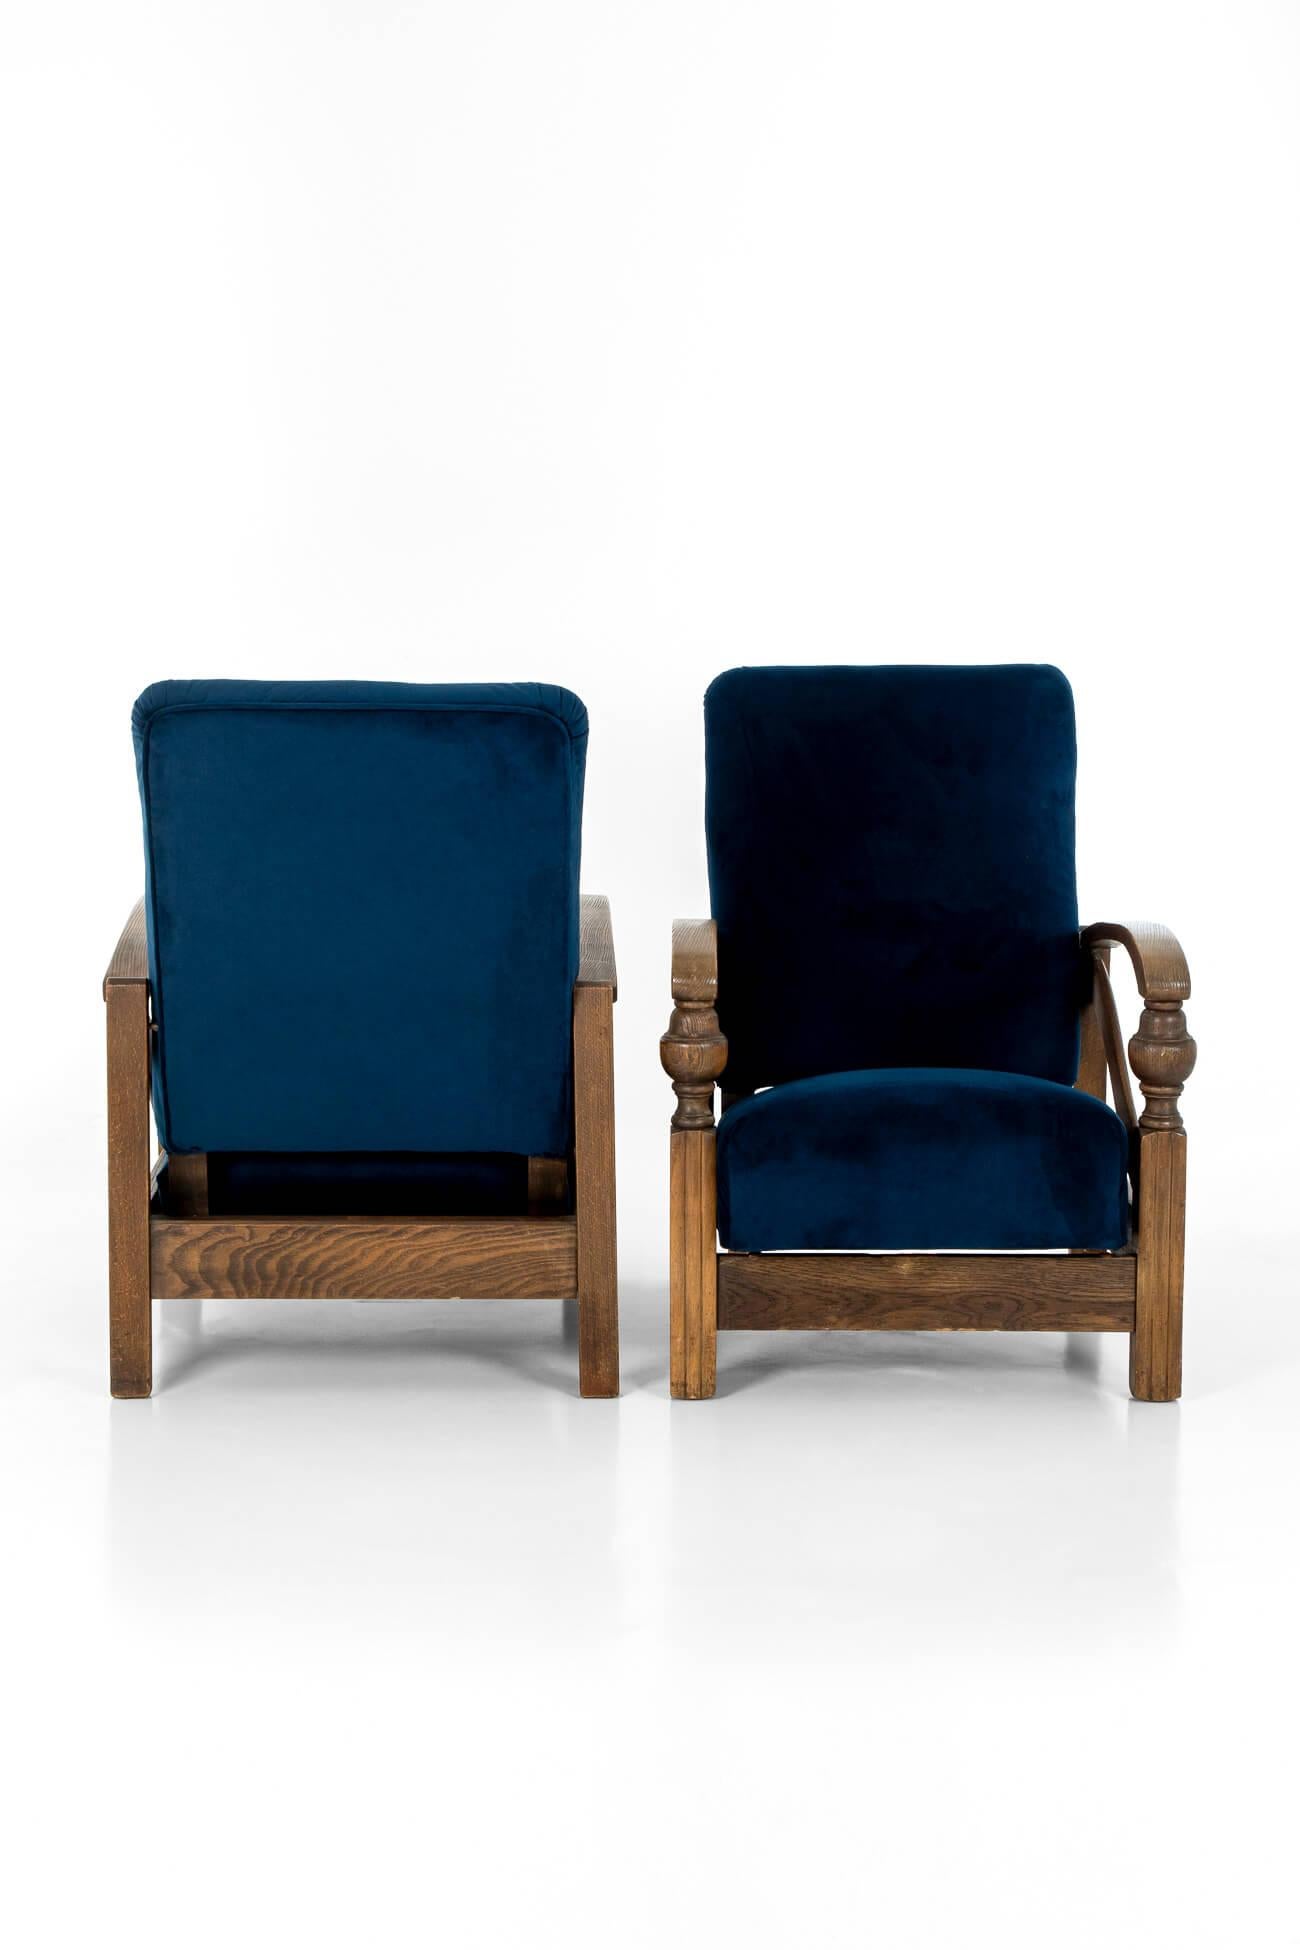 Mid-20th Century Pair of Art Deco Lounge Chairs For Sale